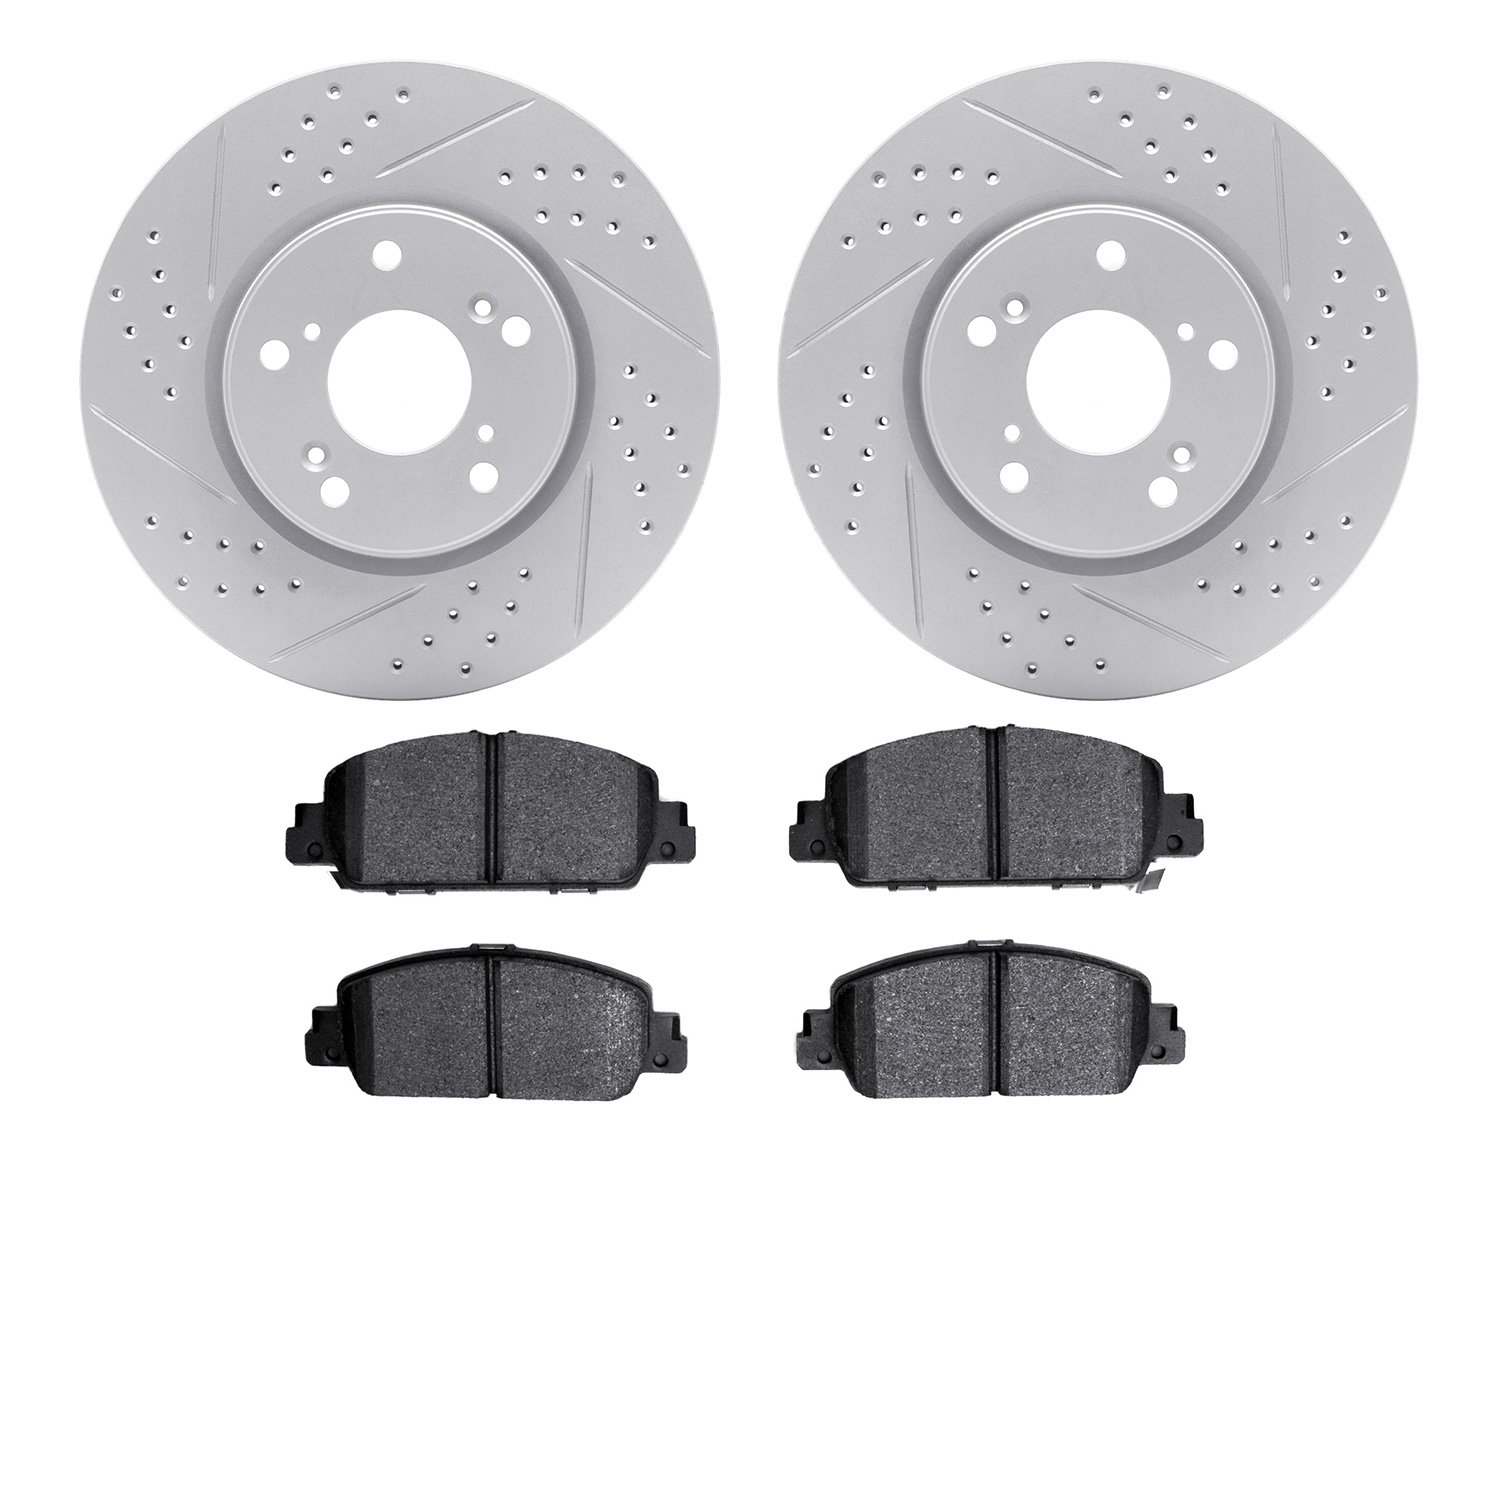 2502-59043 Geoperformance Drilled/Slotted Rotors w/5000 Advanced Brake Pads Kit, 2014-2017 Acura/Honda, Position: Front